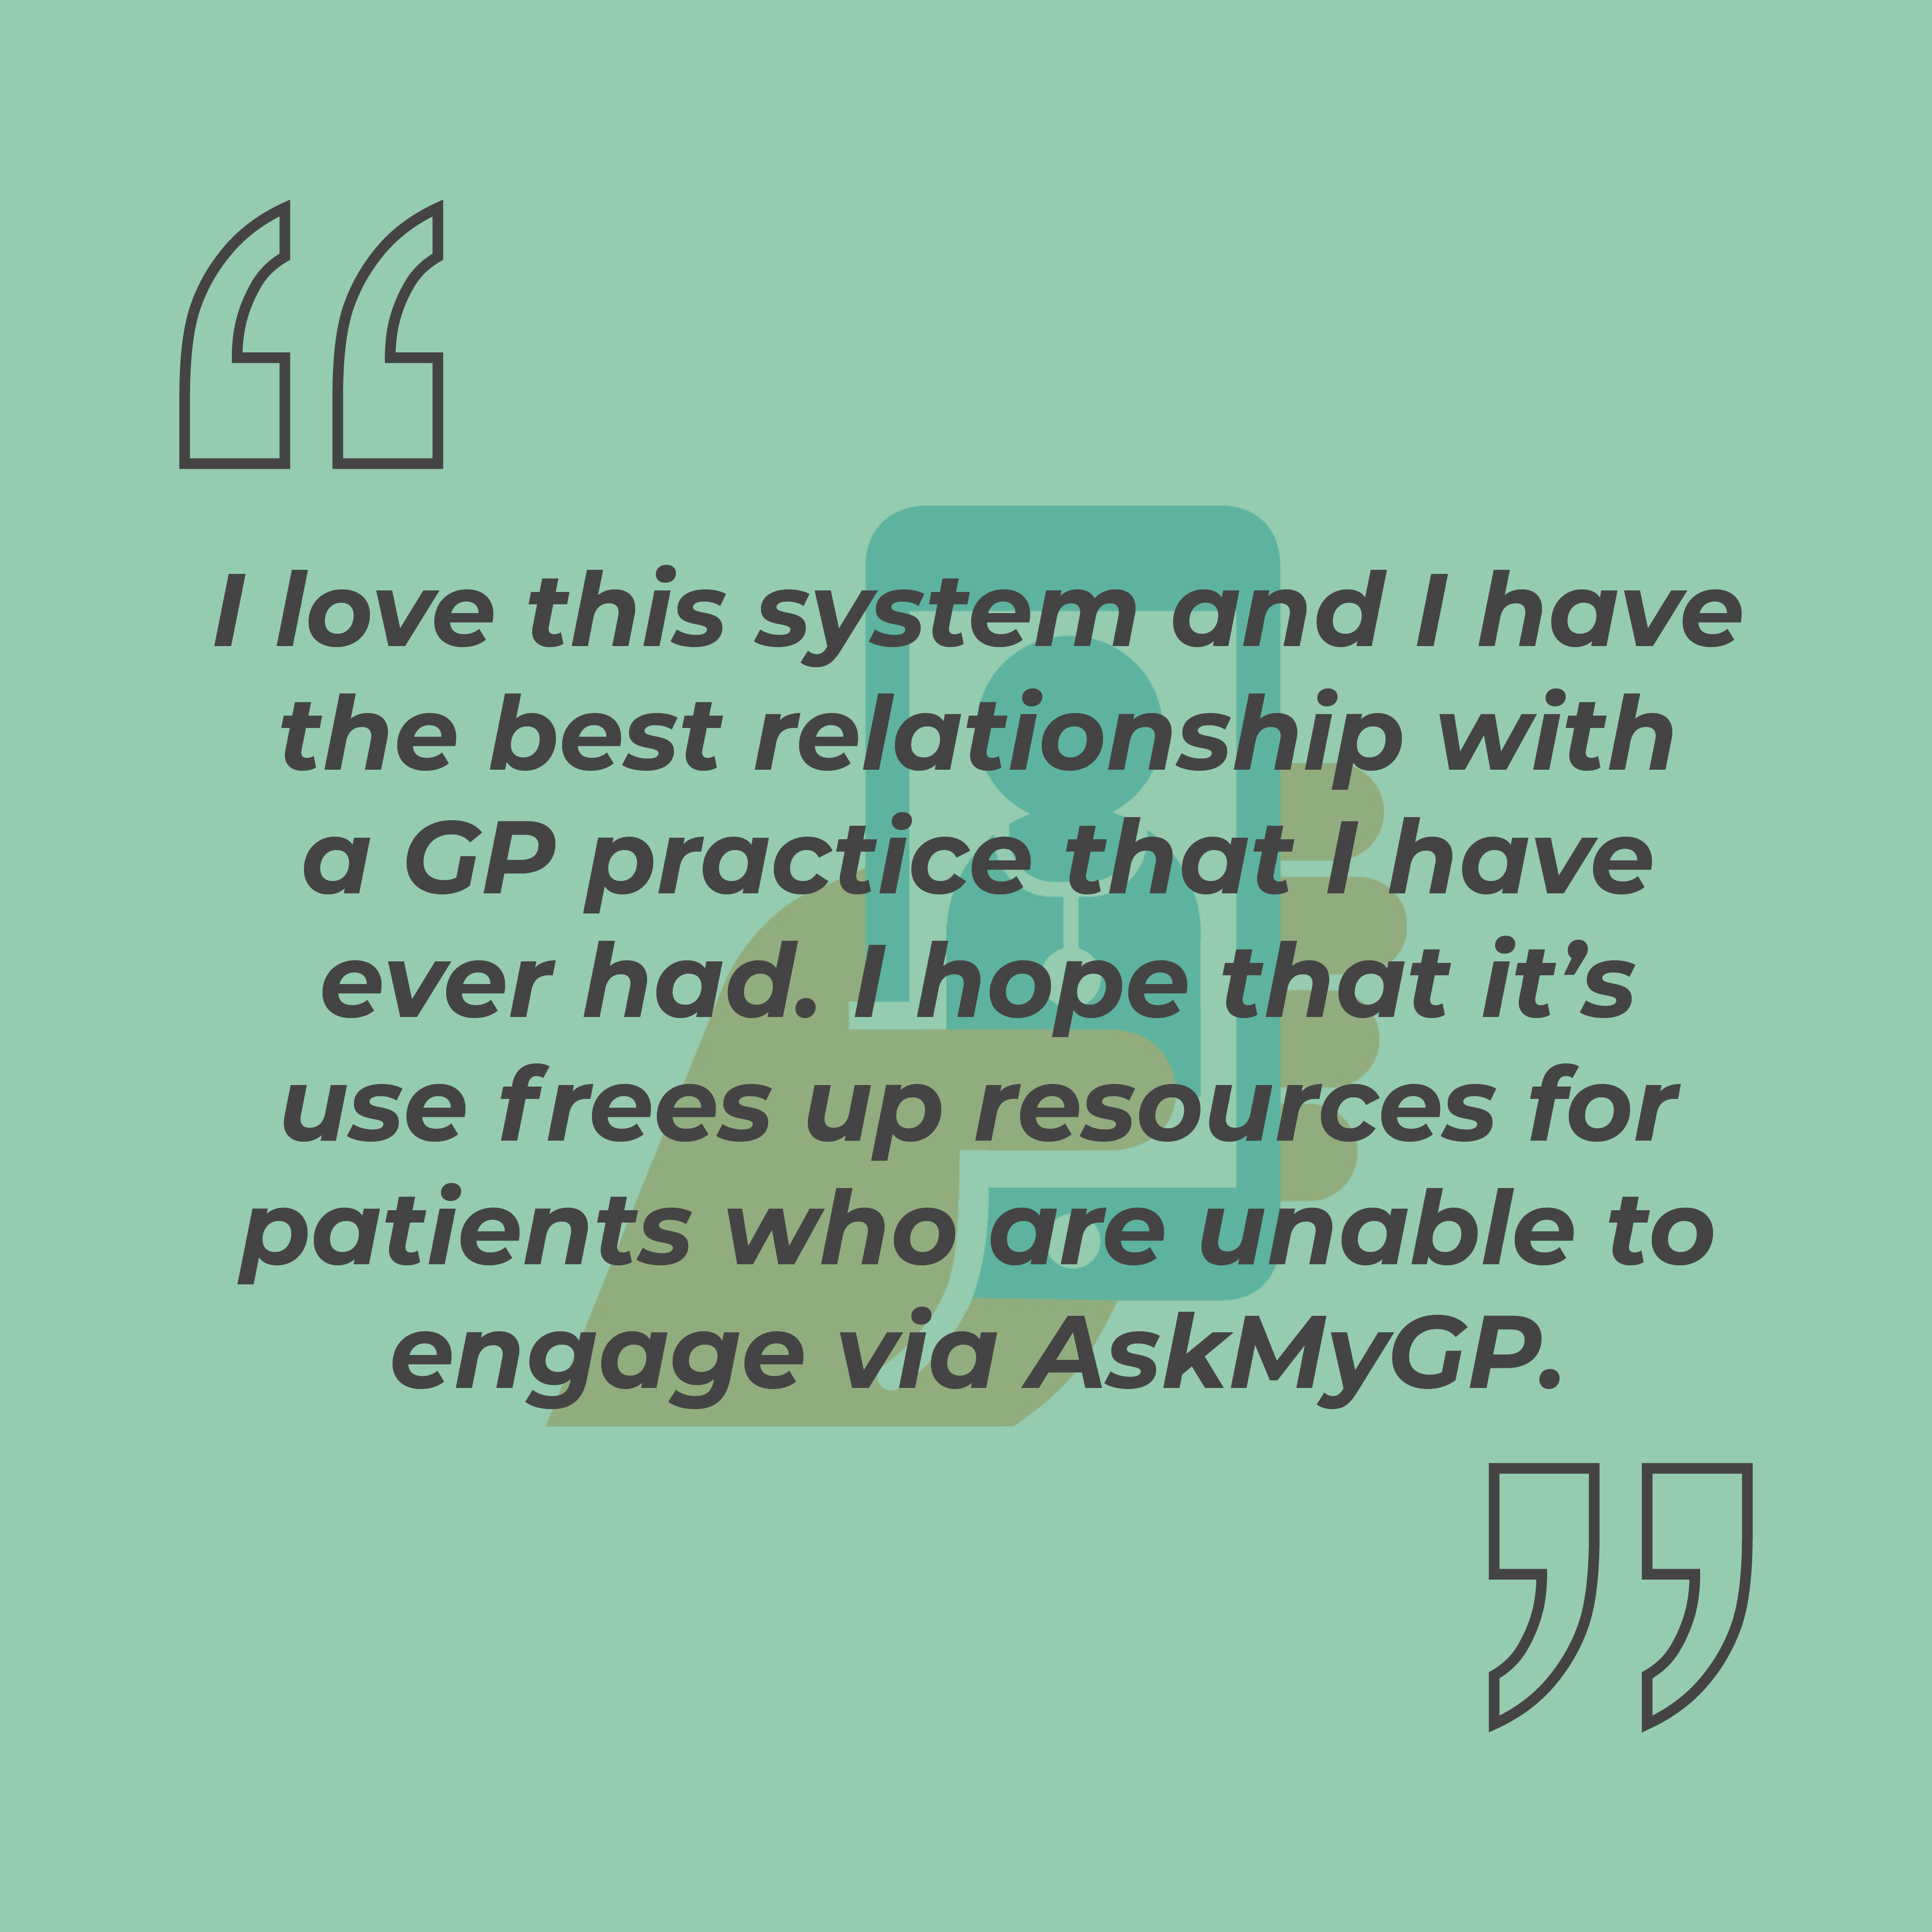 I love this system and I have the best relationship with a GP practice that I have ever had. I hope that it's use frees up resources for patients who are unable to engage via AskMyGP.